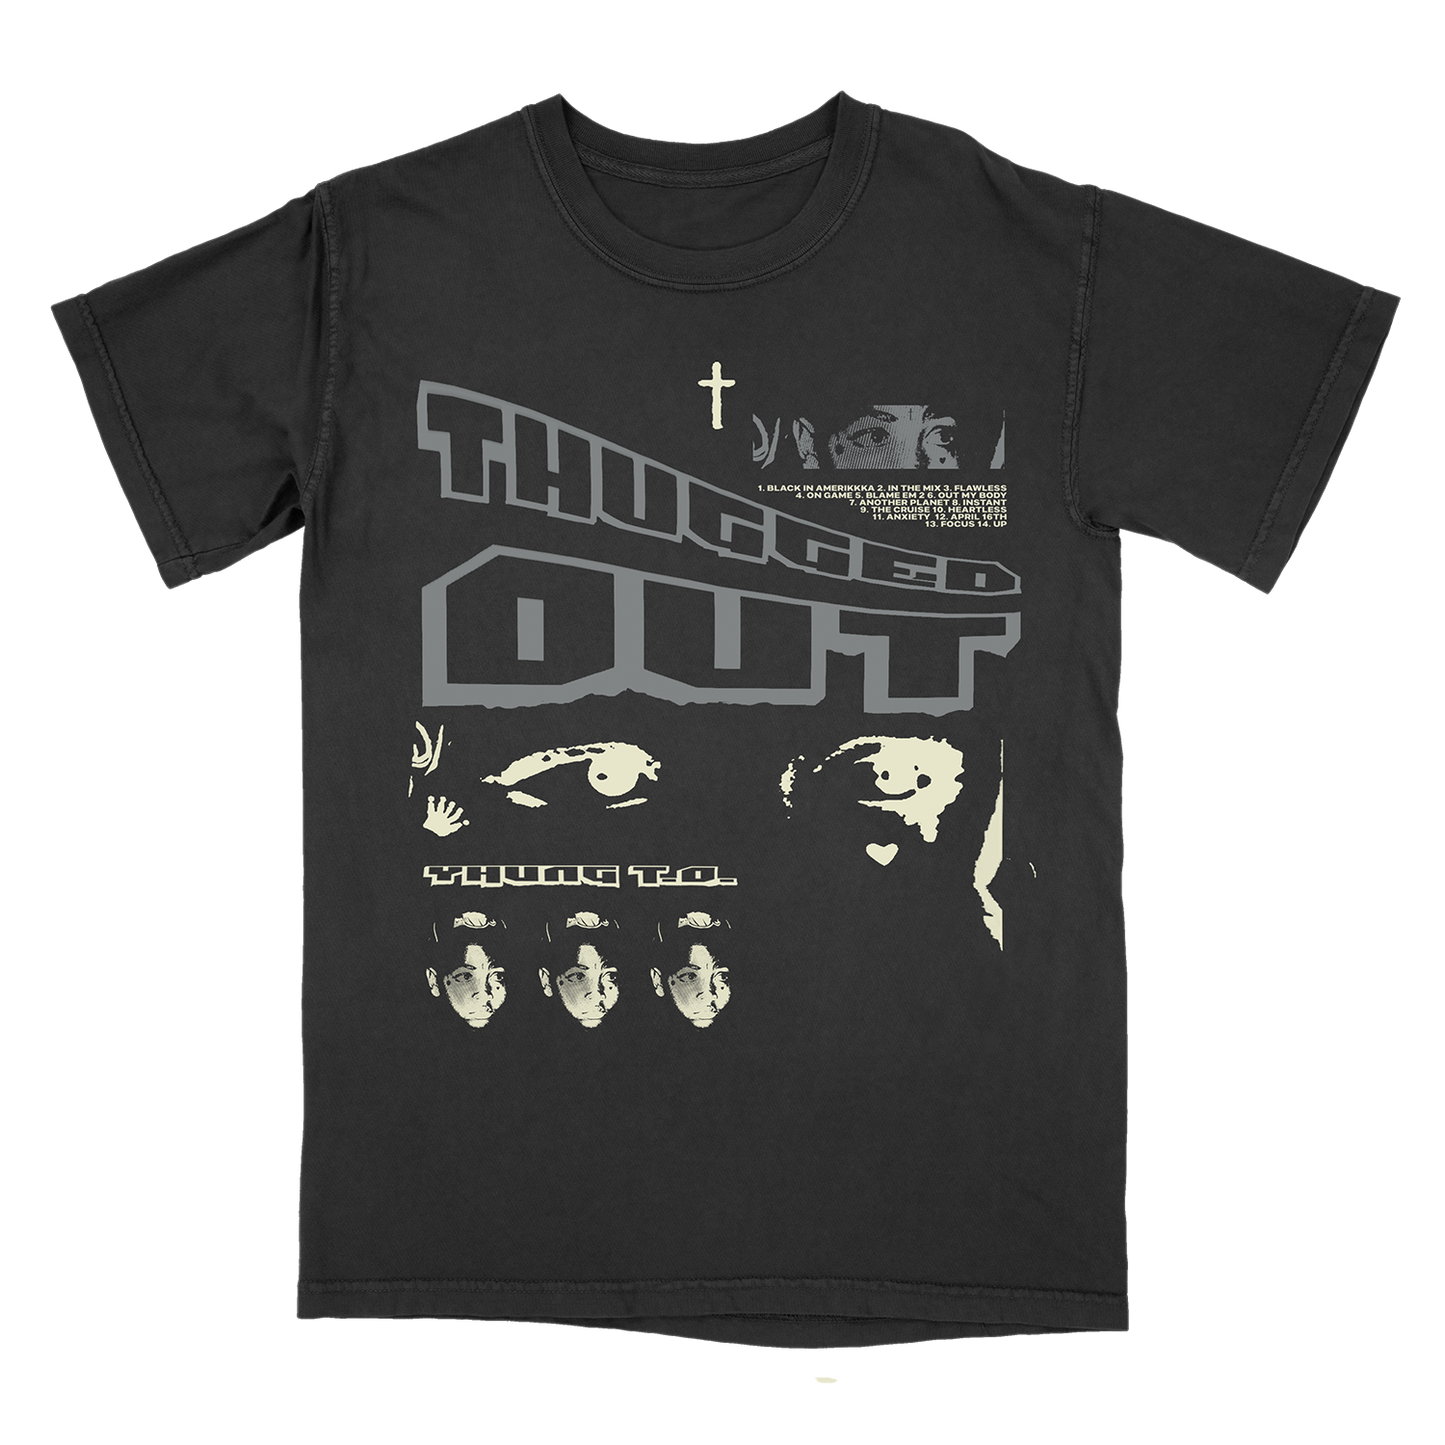 Yhung T.O. - Thugged Out Cross Black T-Shirt + Download